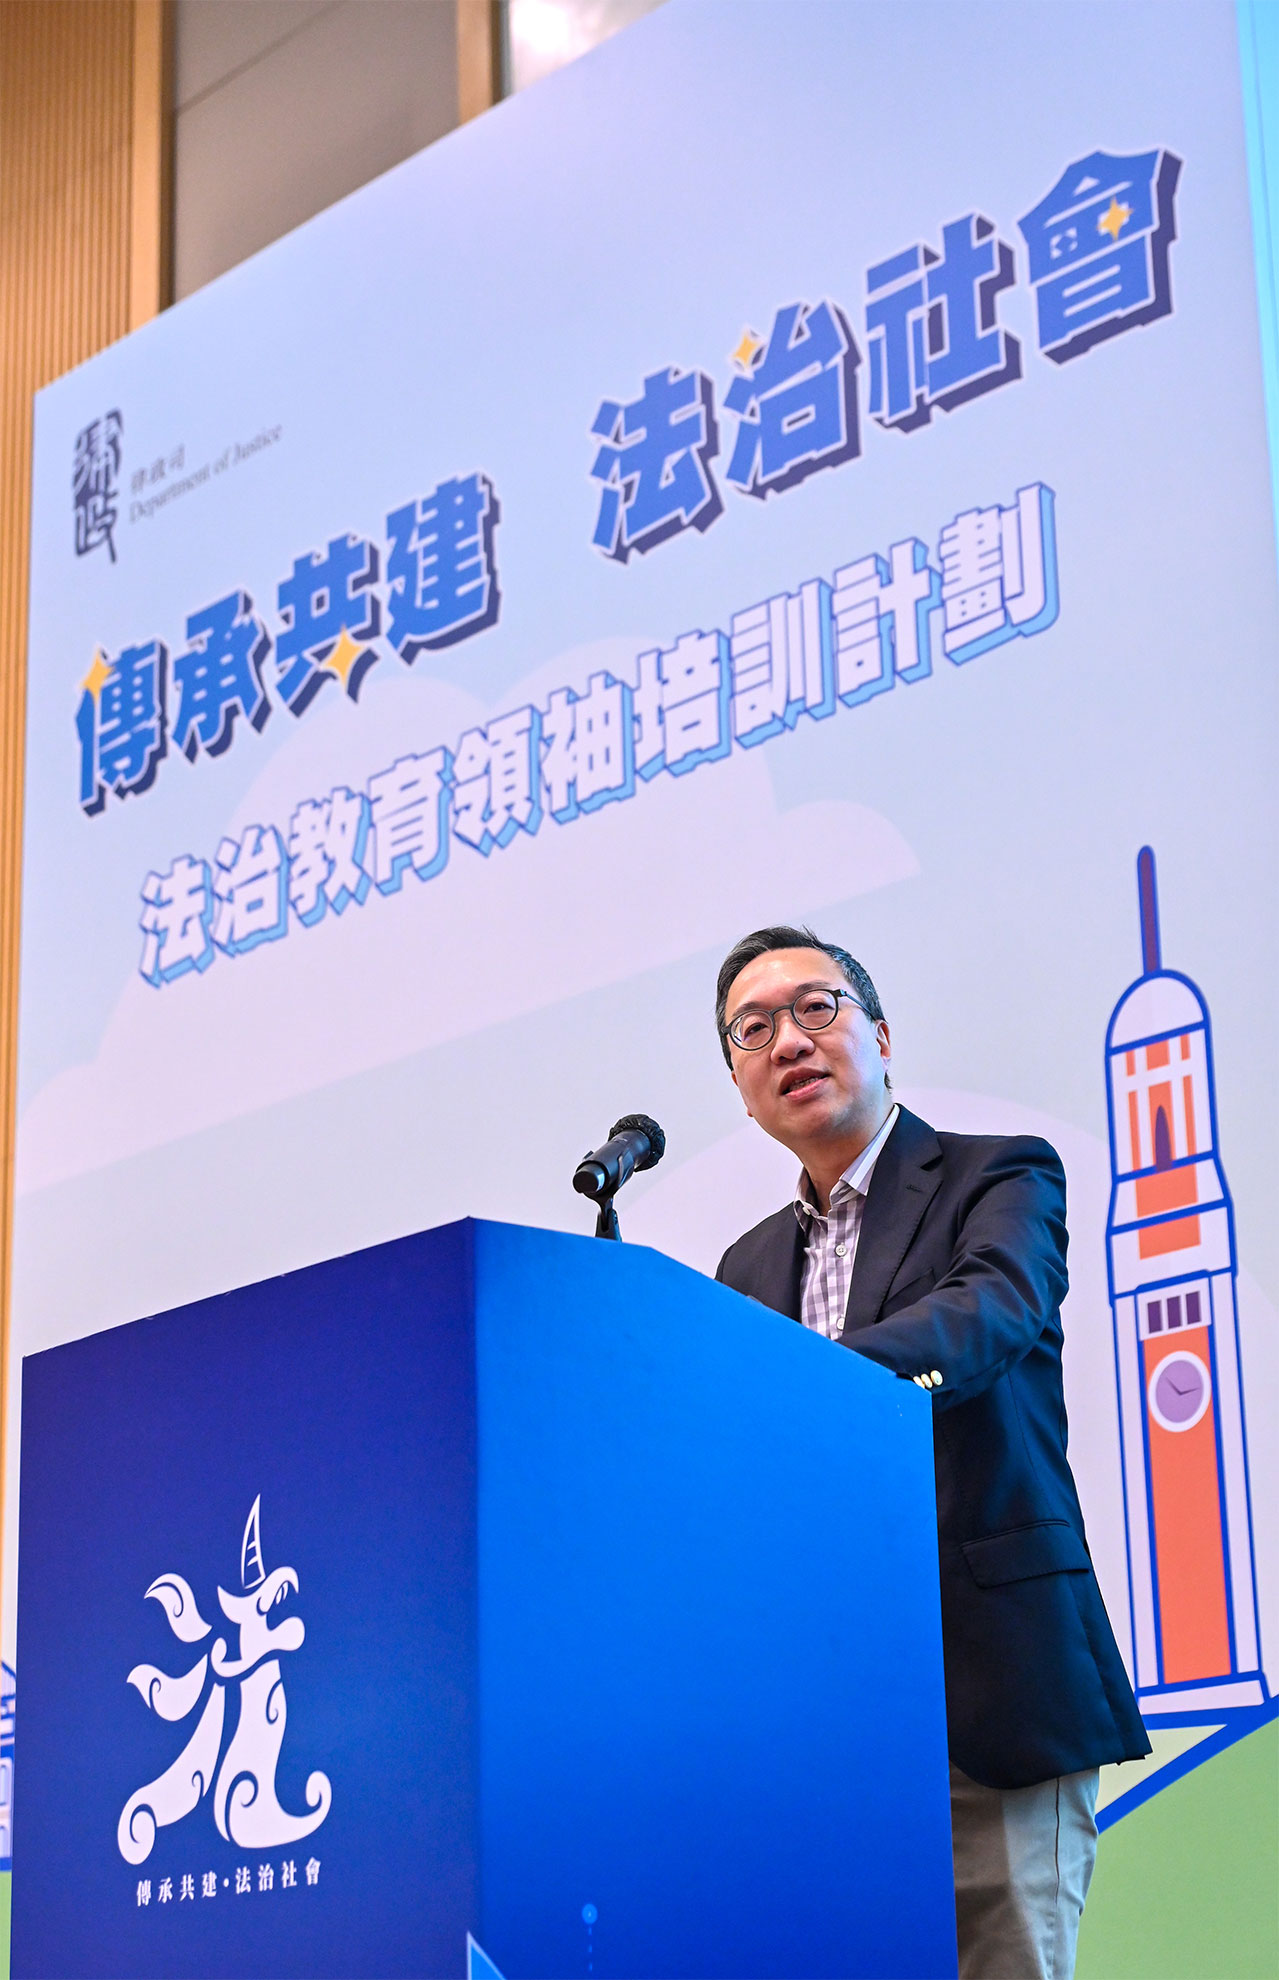 The first phase of the Rule of Law Education Train-the-Leaders Programme, themed "Rule of Law Education Stars", was launched today (November 25) by the Department of Justice. Photo shows the Secretary for Justice, Mr Paul Lam, SC, delivering his speech at the launch ceremony of the programme.